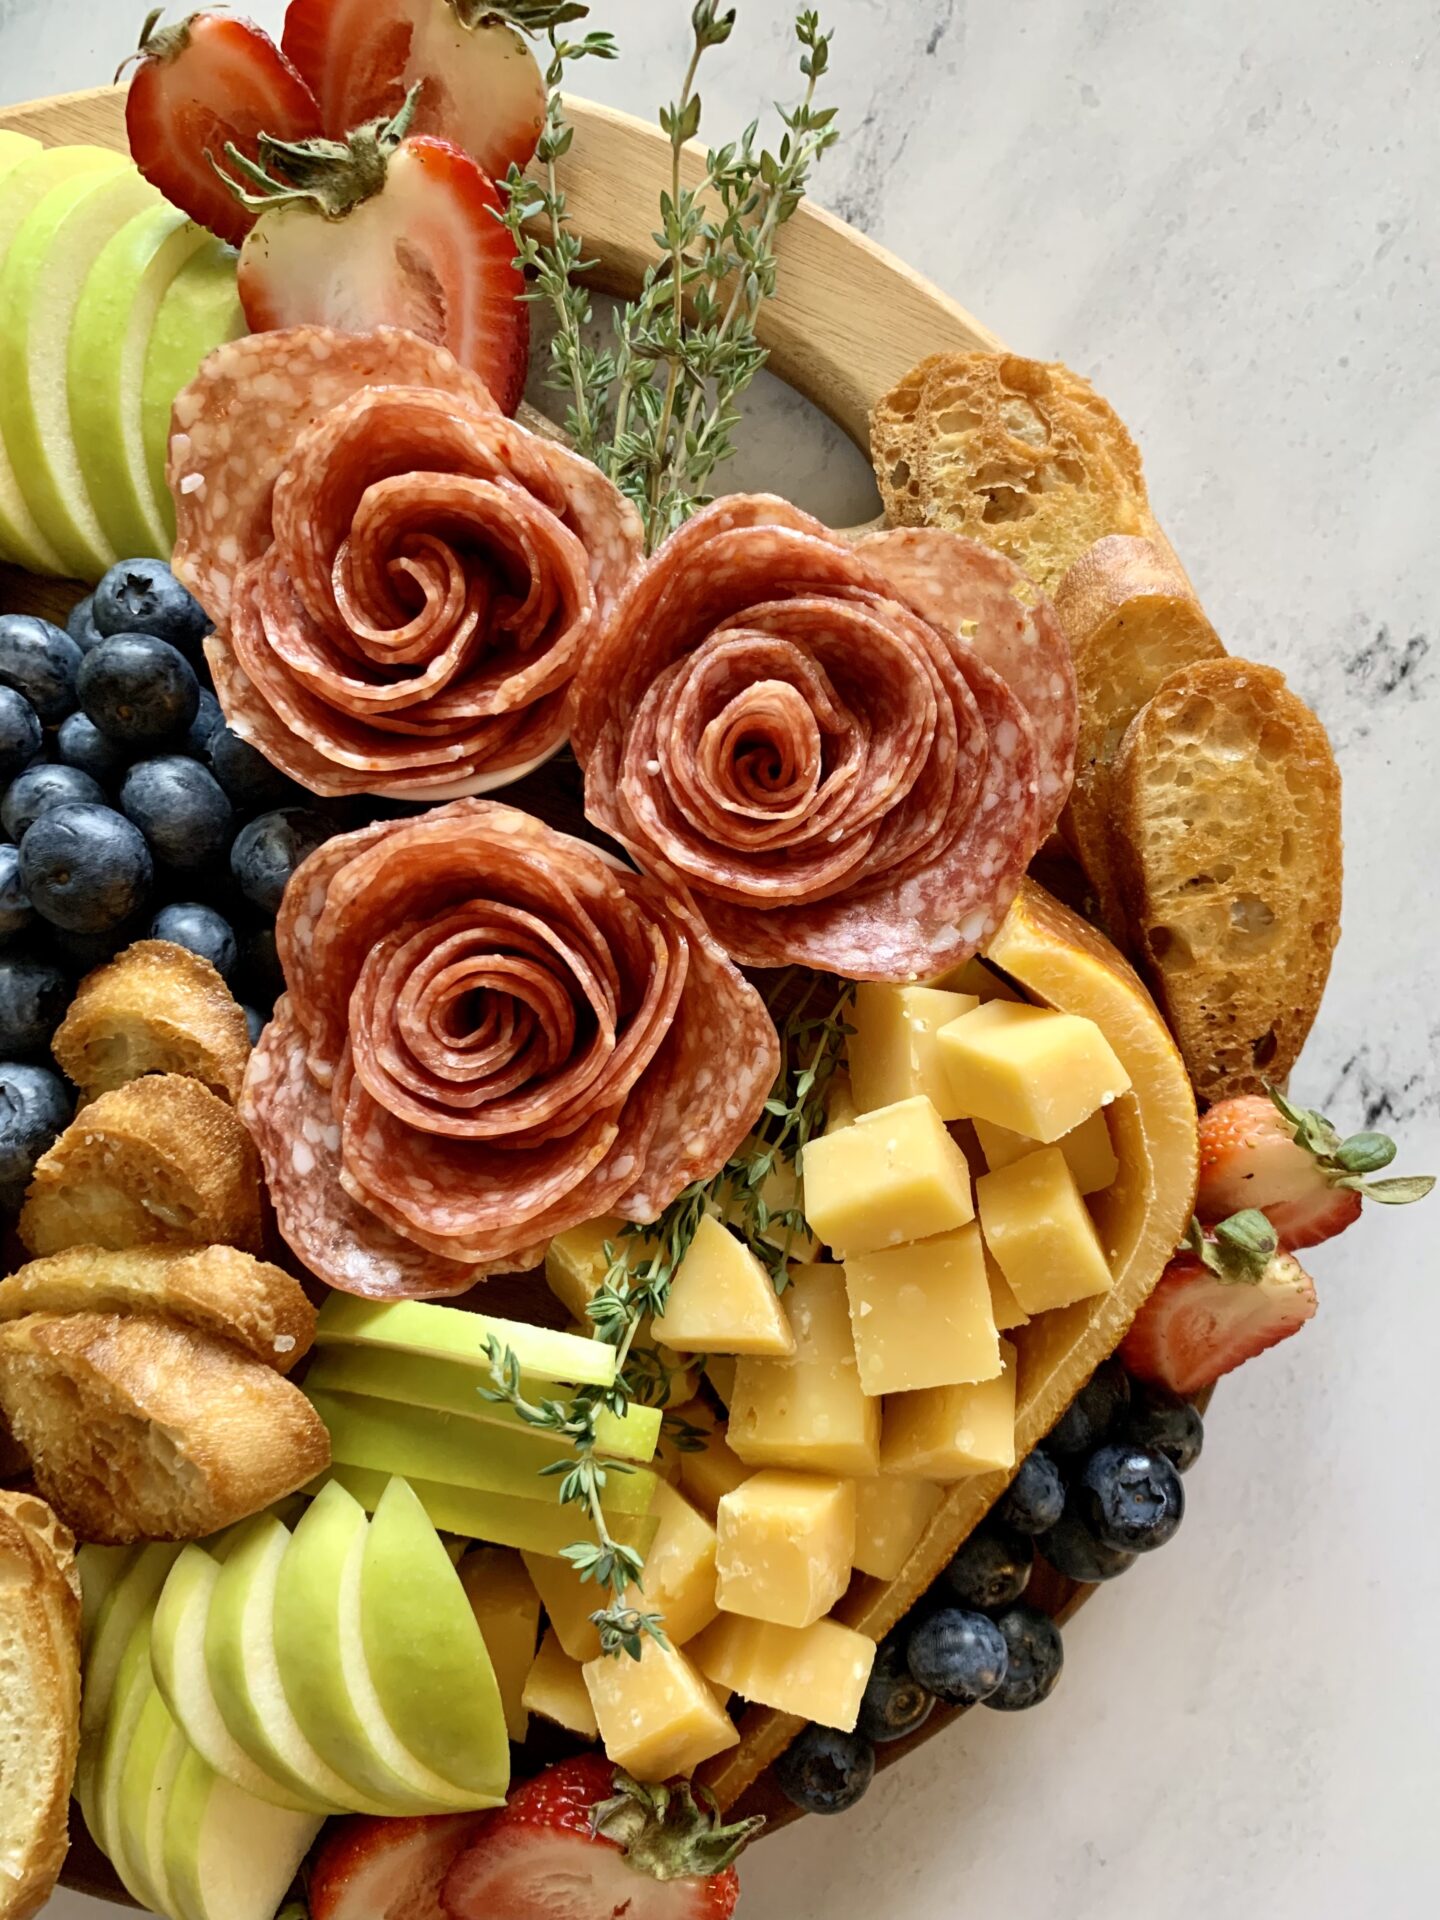 32 Stunning Charcuterie Board Ideas for Every Occasion